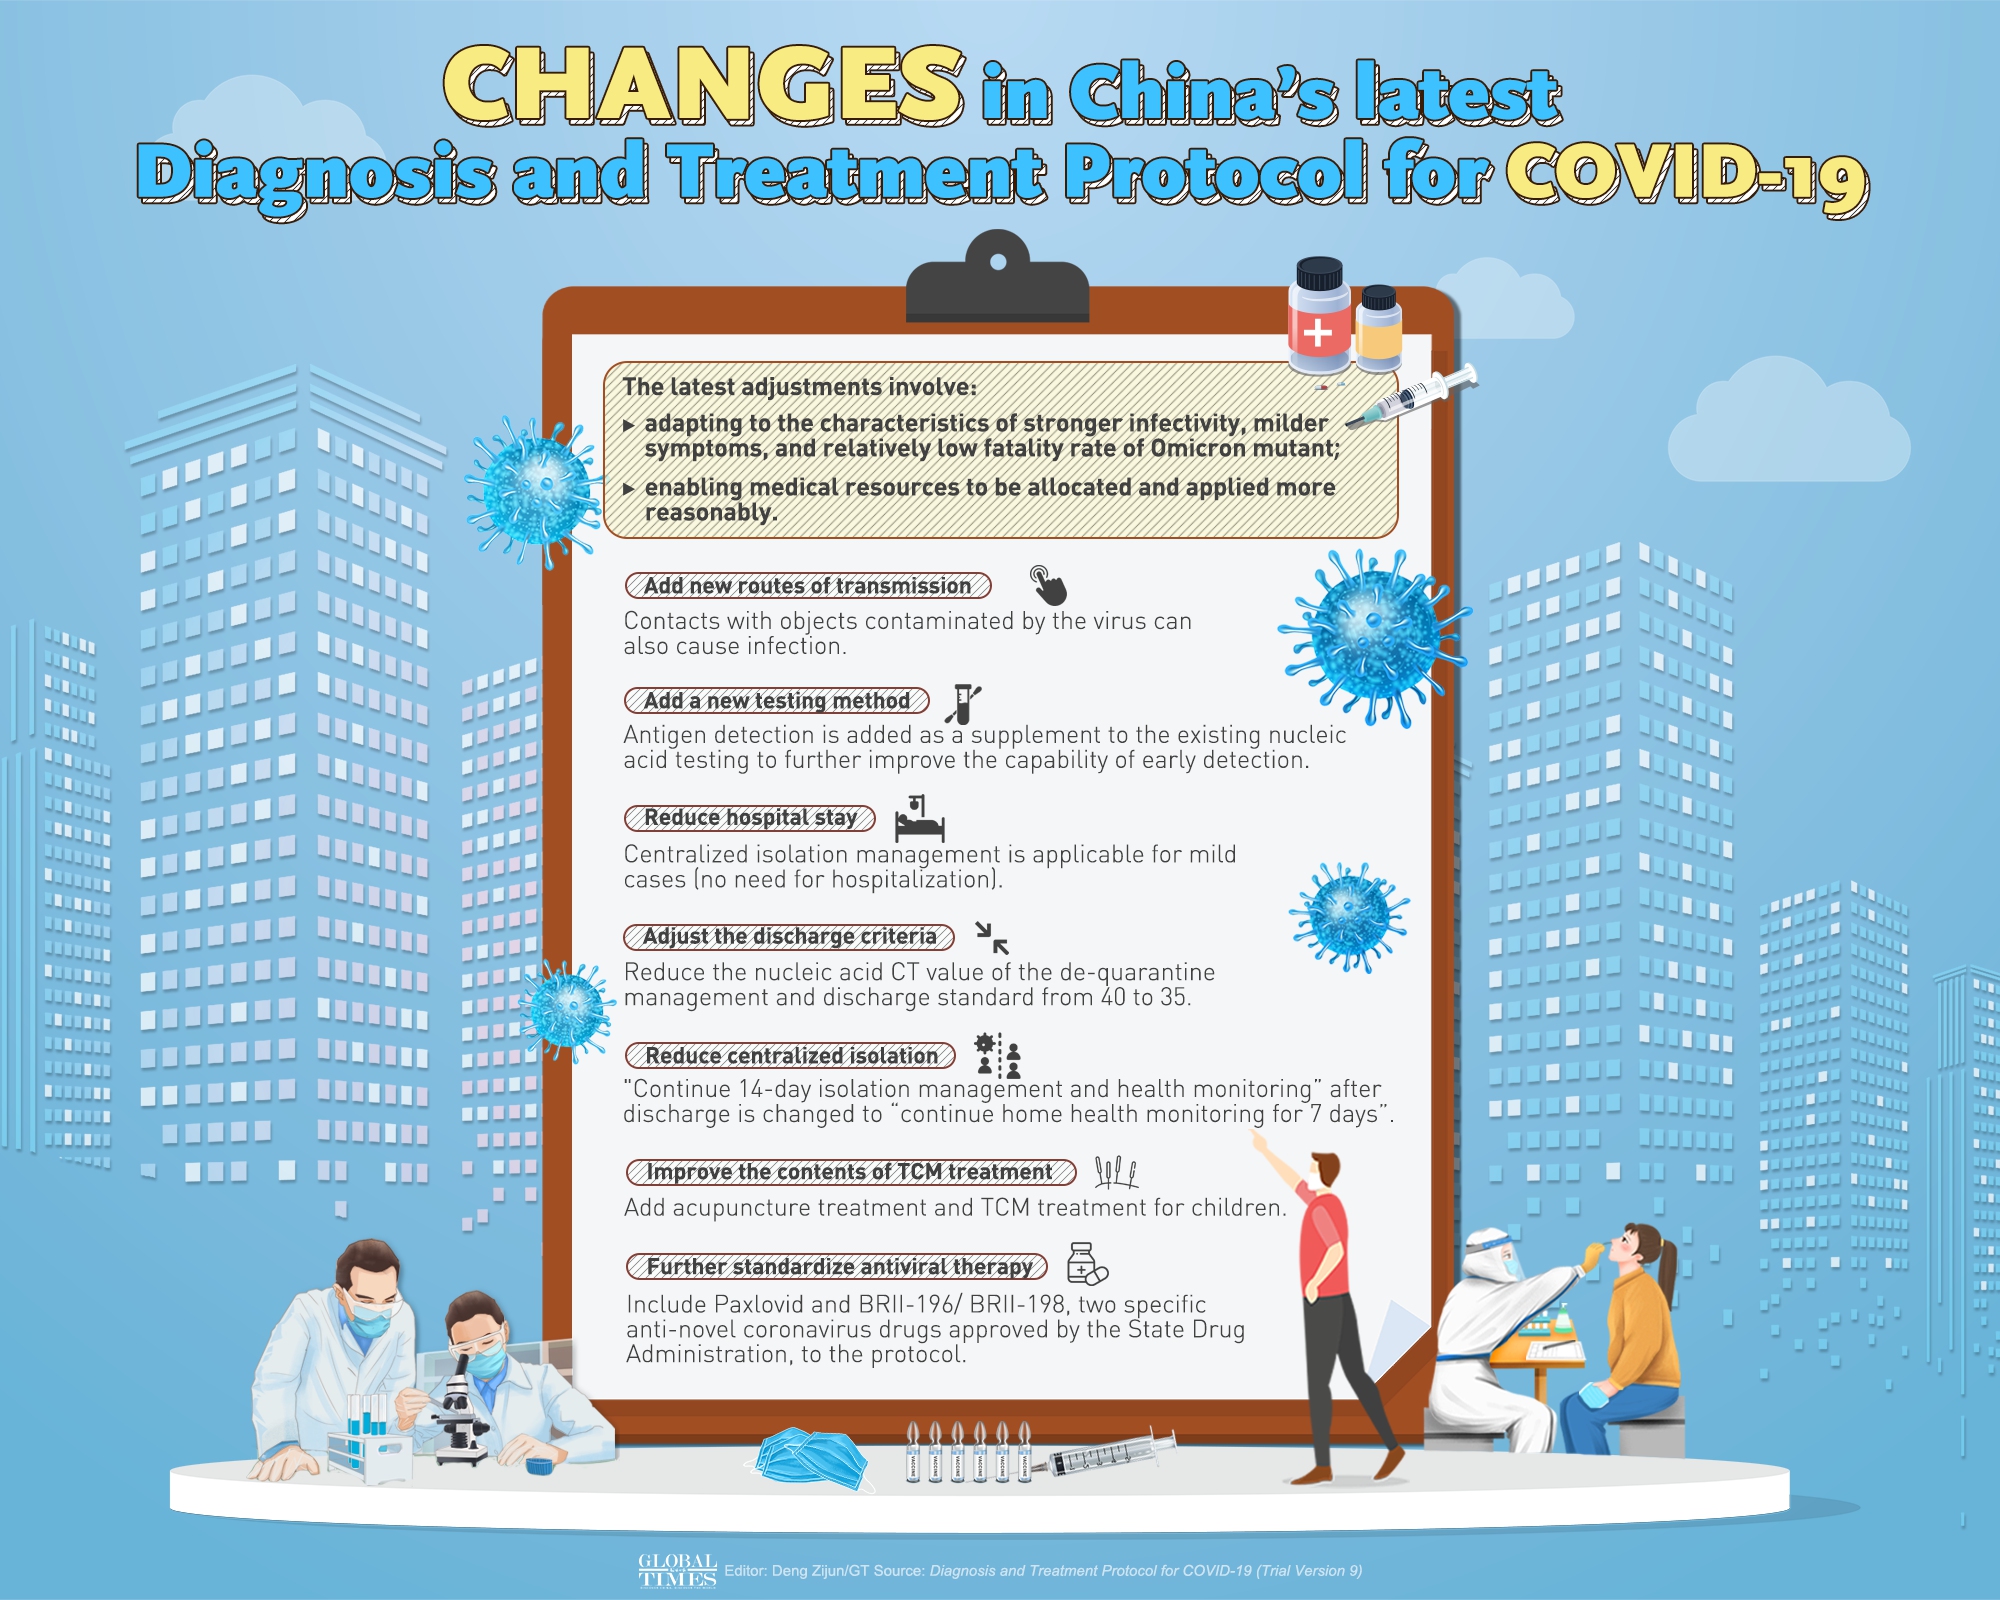 Changes in China's latest Diagnosis and Treatment Protocol for COVID-19 Infographic: Deng Zijun/GT